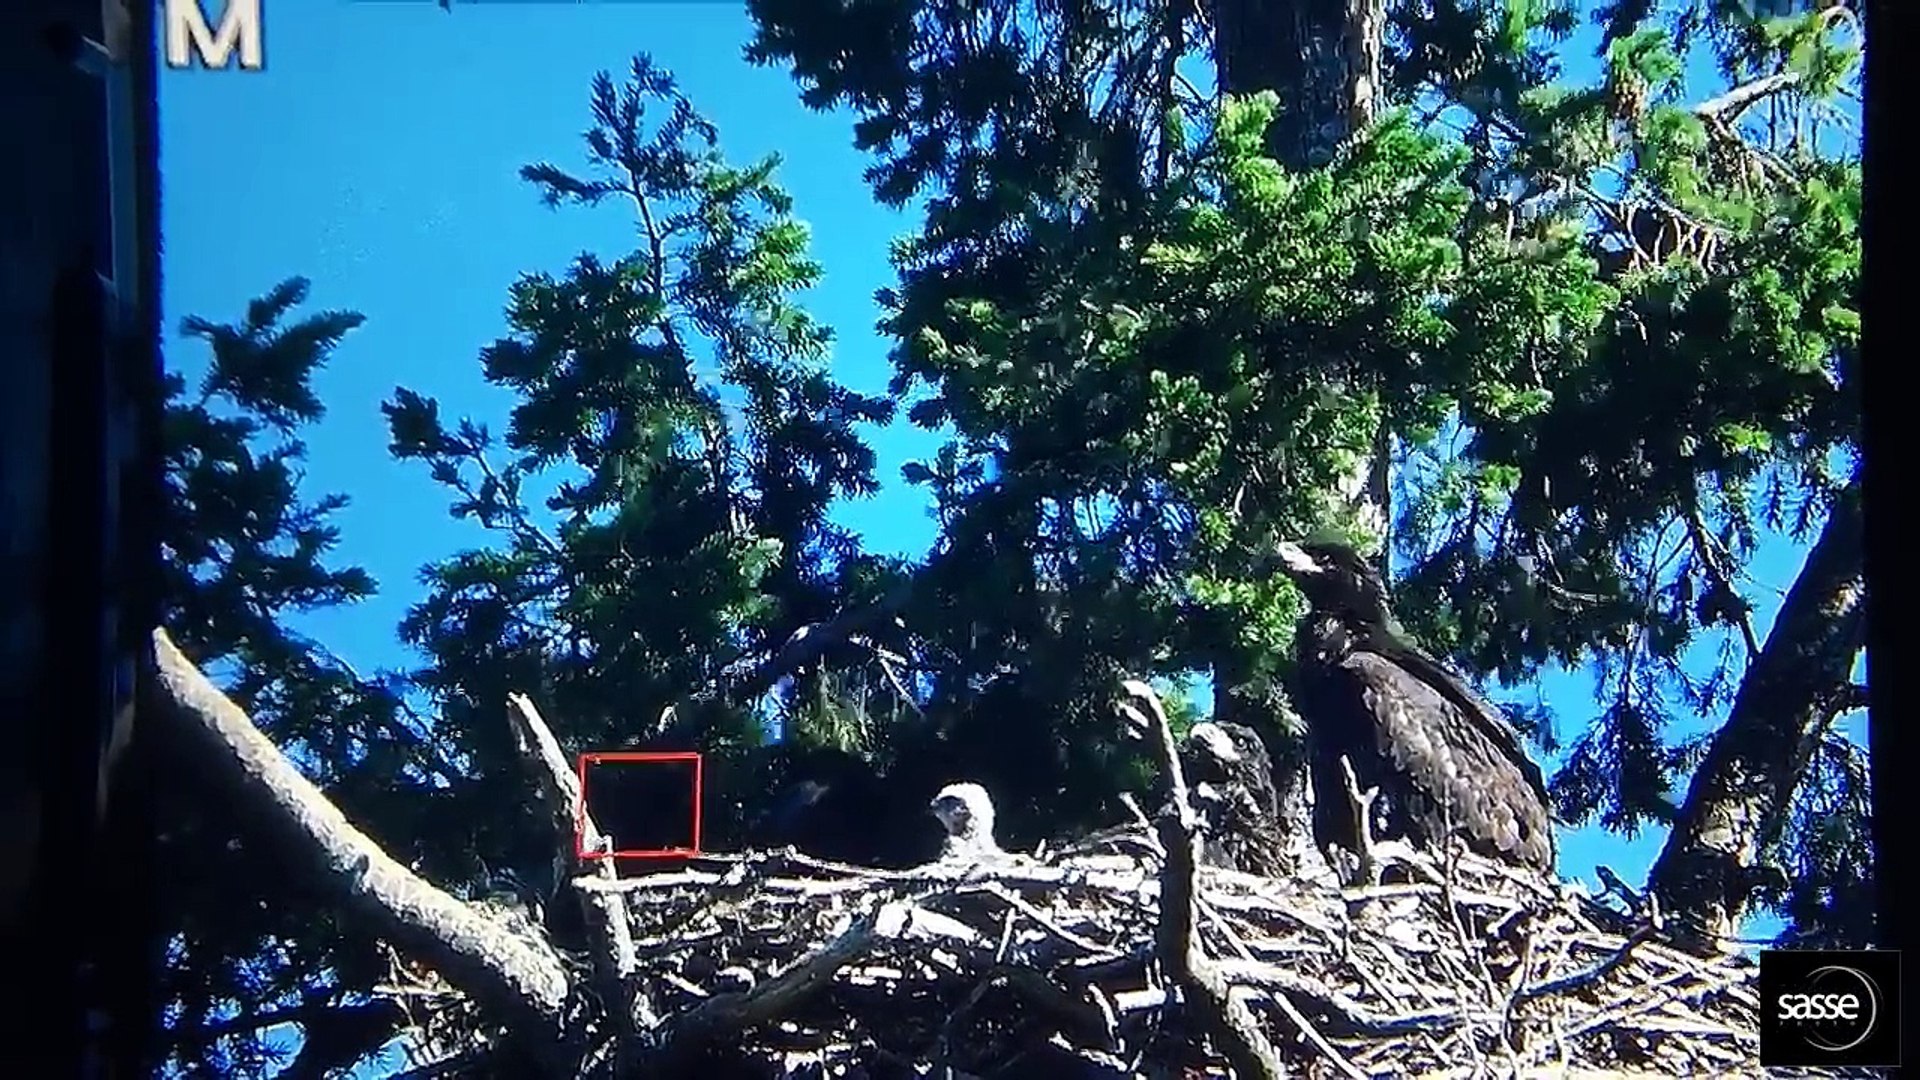 Bald eagle defies nature by adopting, not eating, baby hawk